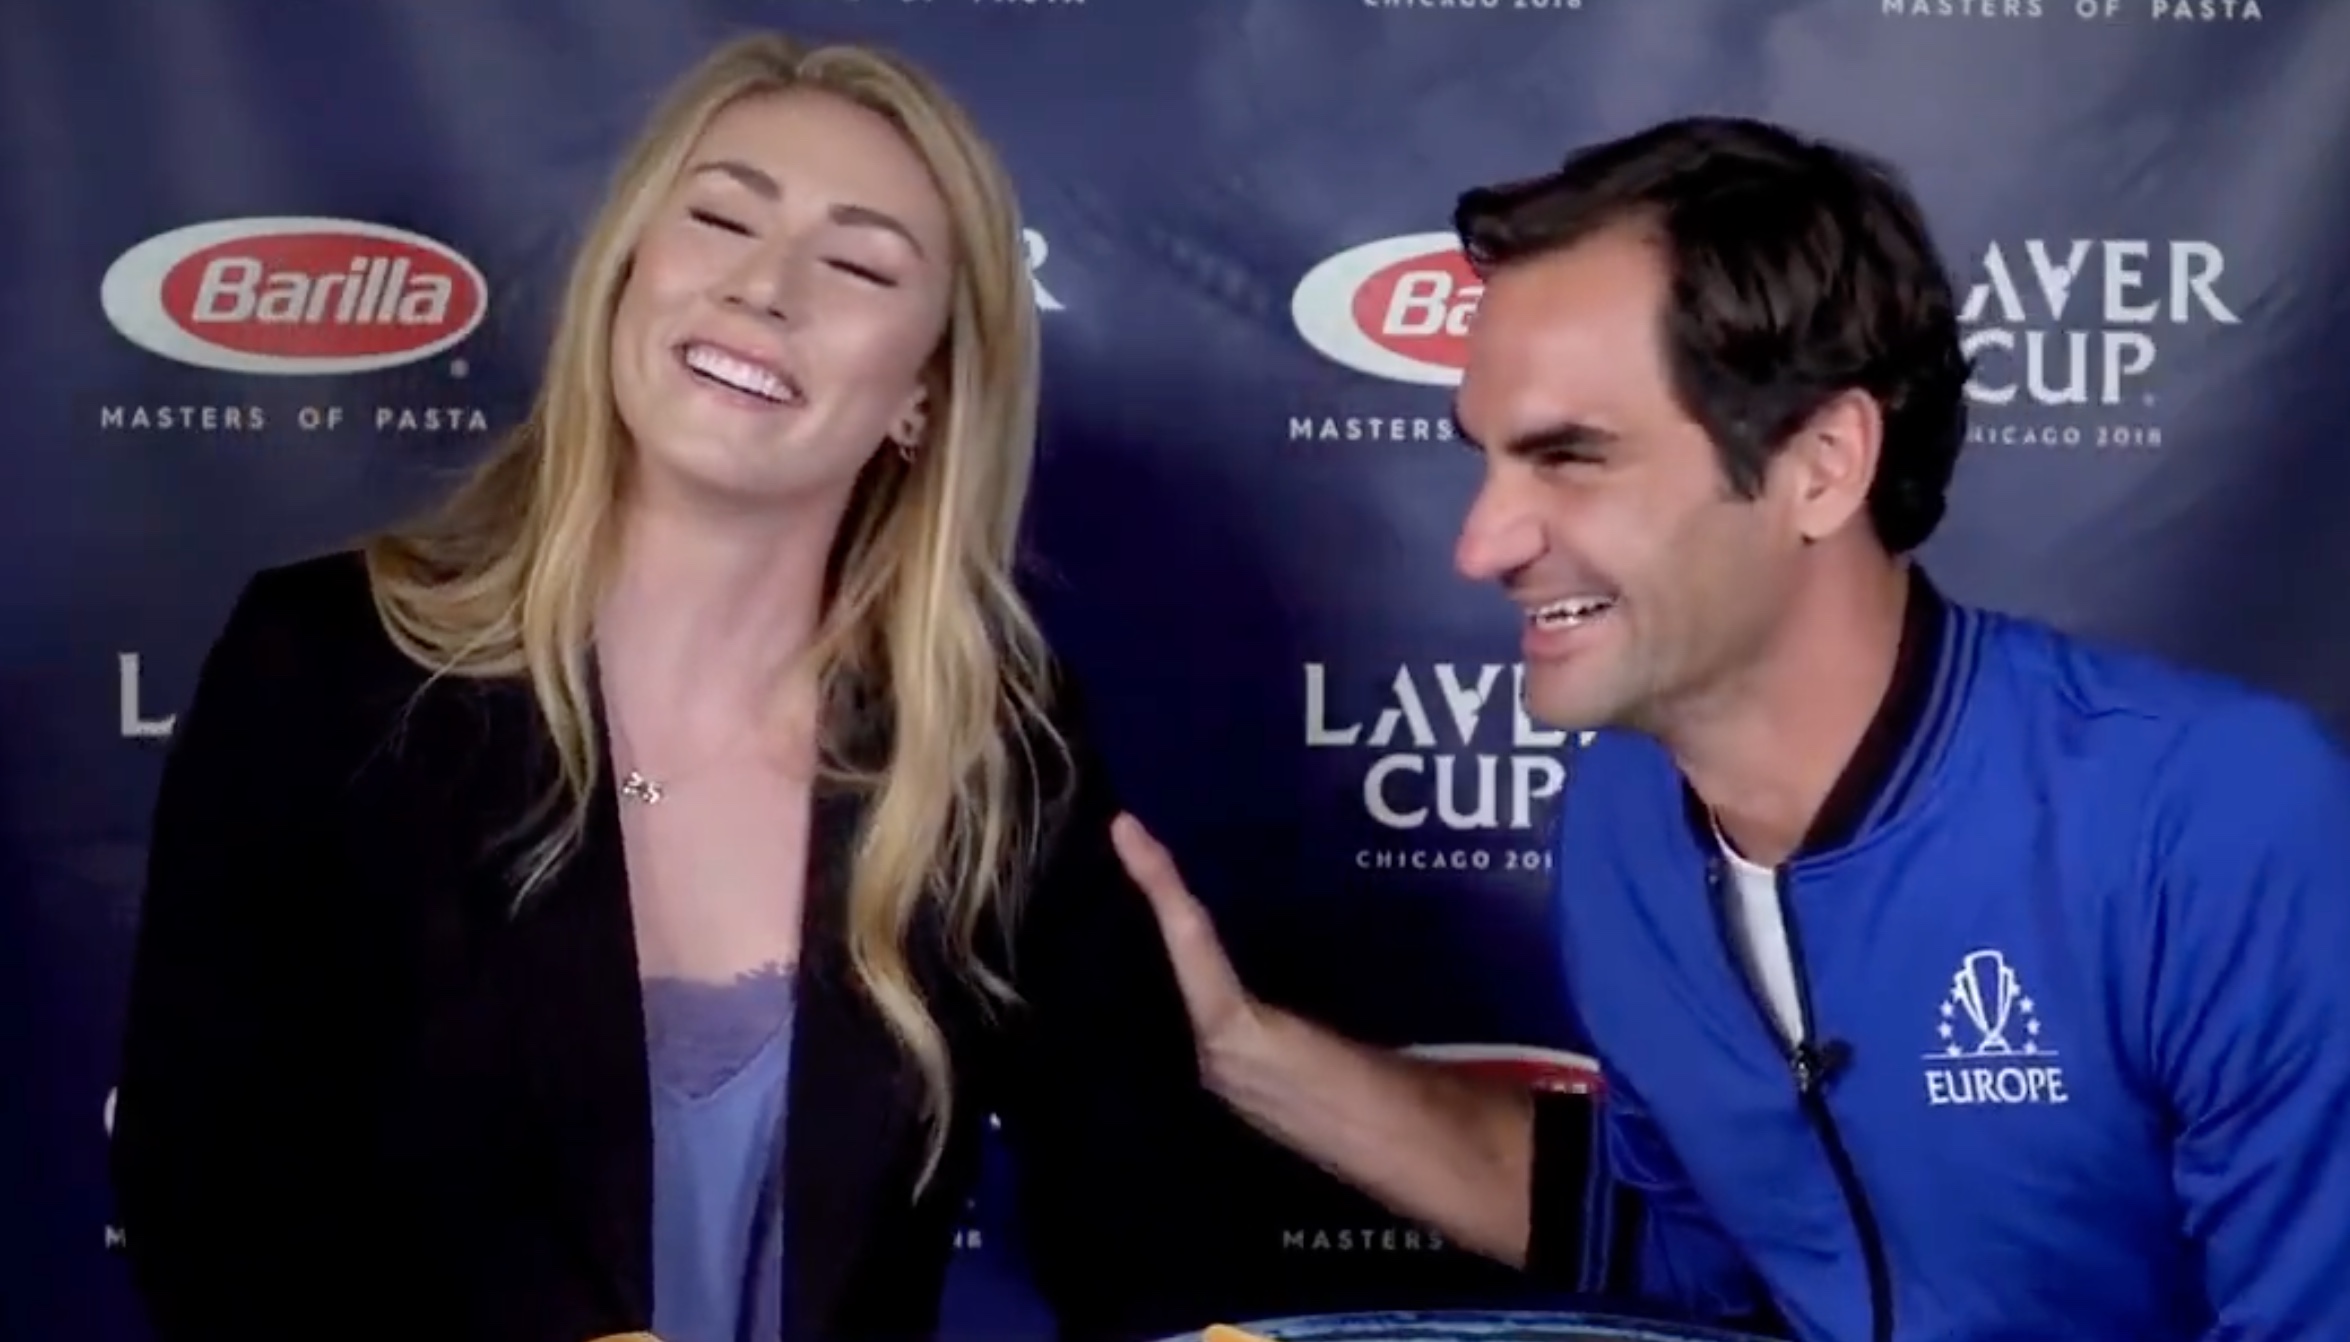 VIDEO: Mikaela Shiffrin Loses It While Interviewing Roger Federer